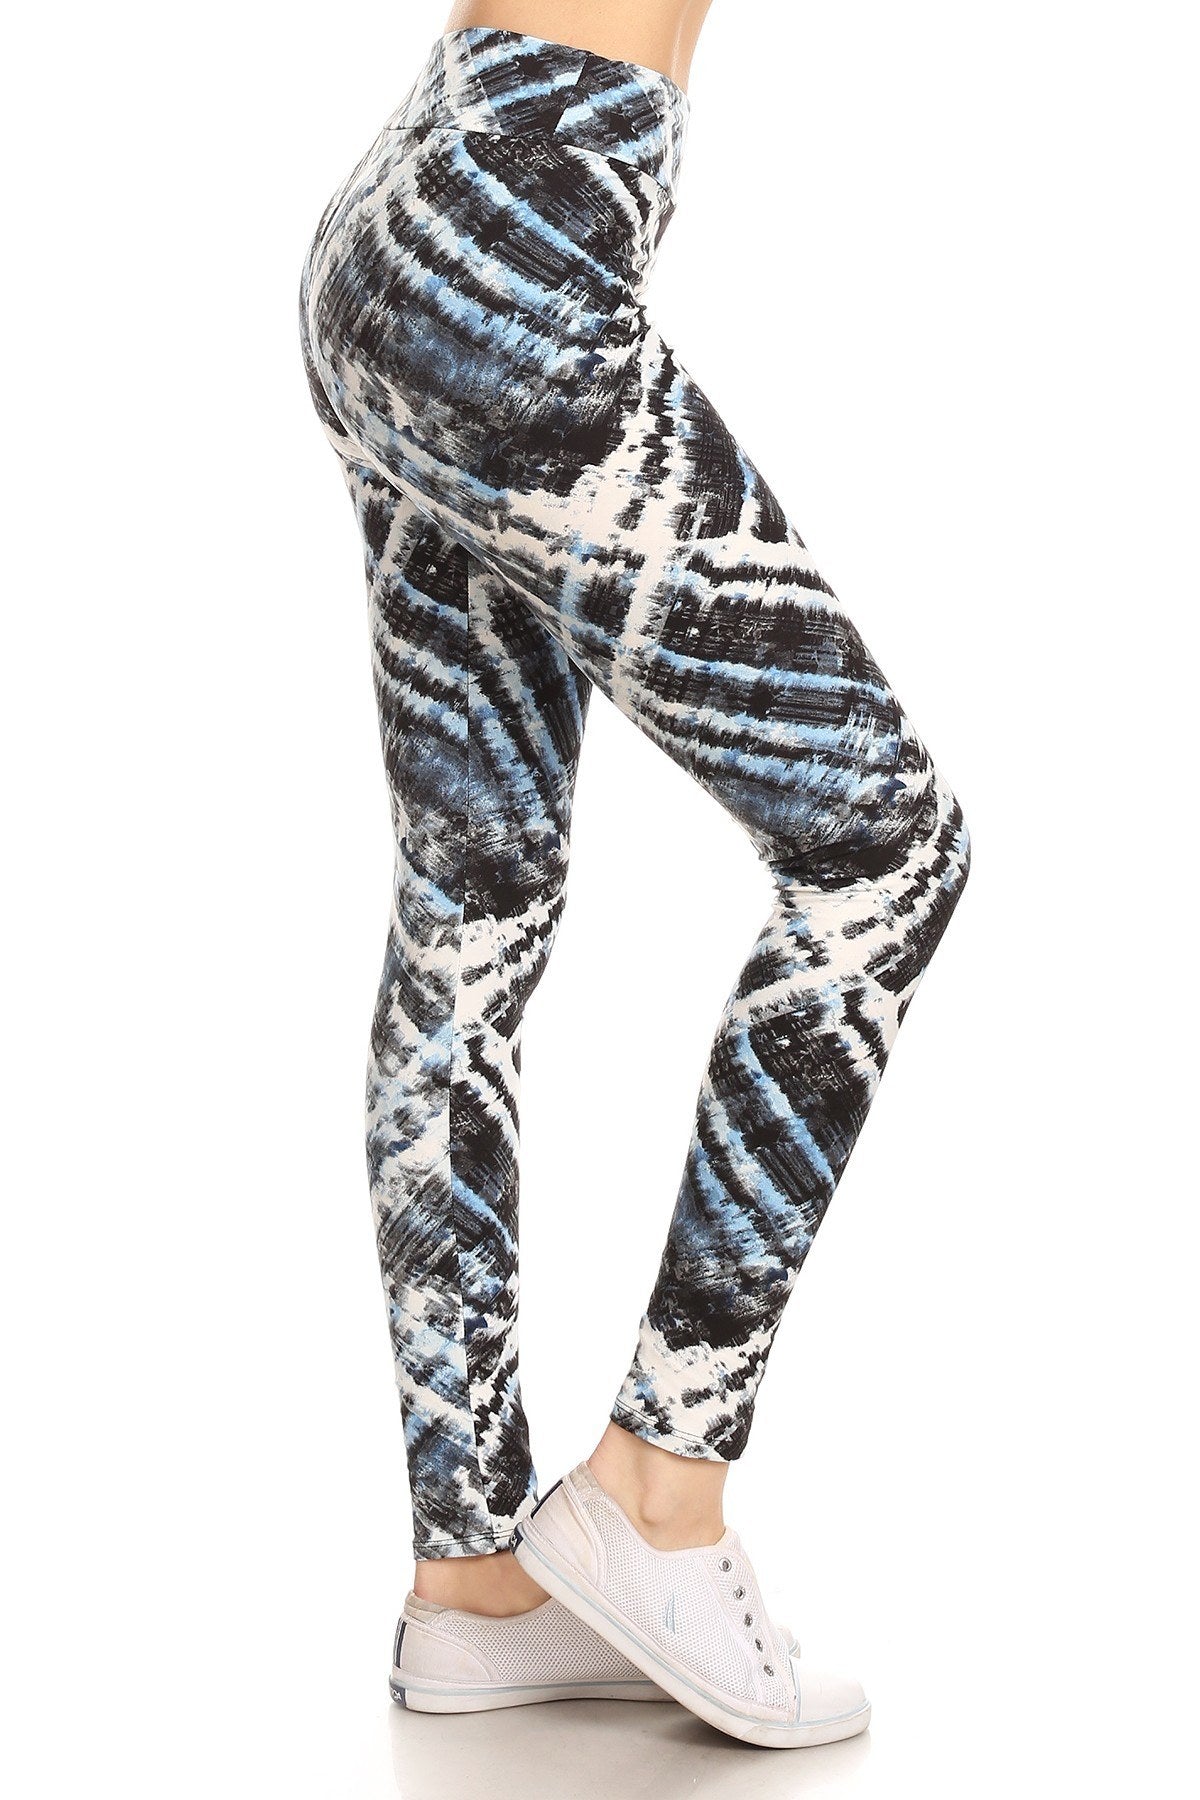 Yoga Style Banded Lined Tie Dye Printed Knit Legging With High Waist king-general-store-5710.myshopify.com